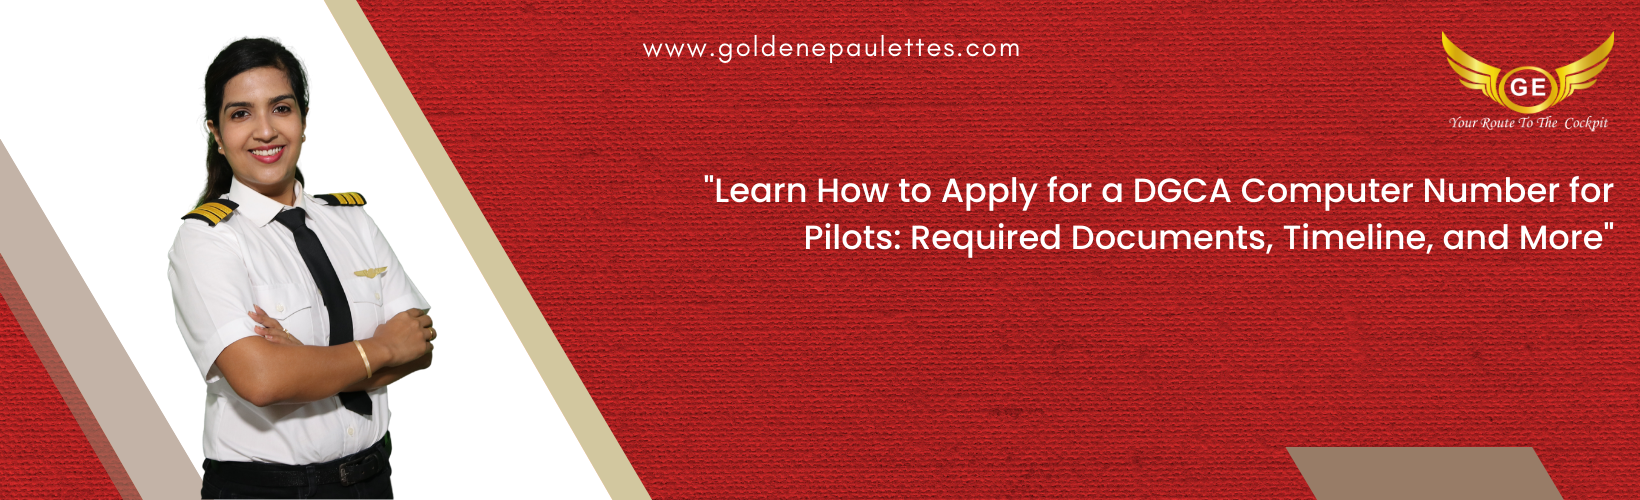 Understanding the DGCA Computer Number Application Process for Pilots